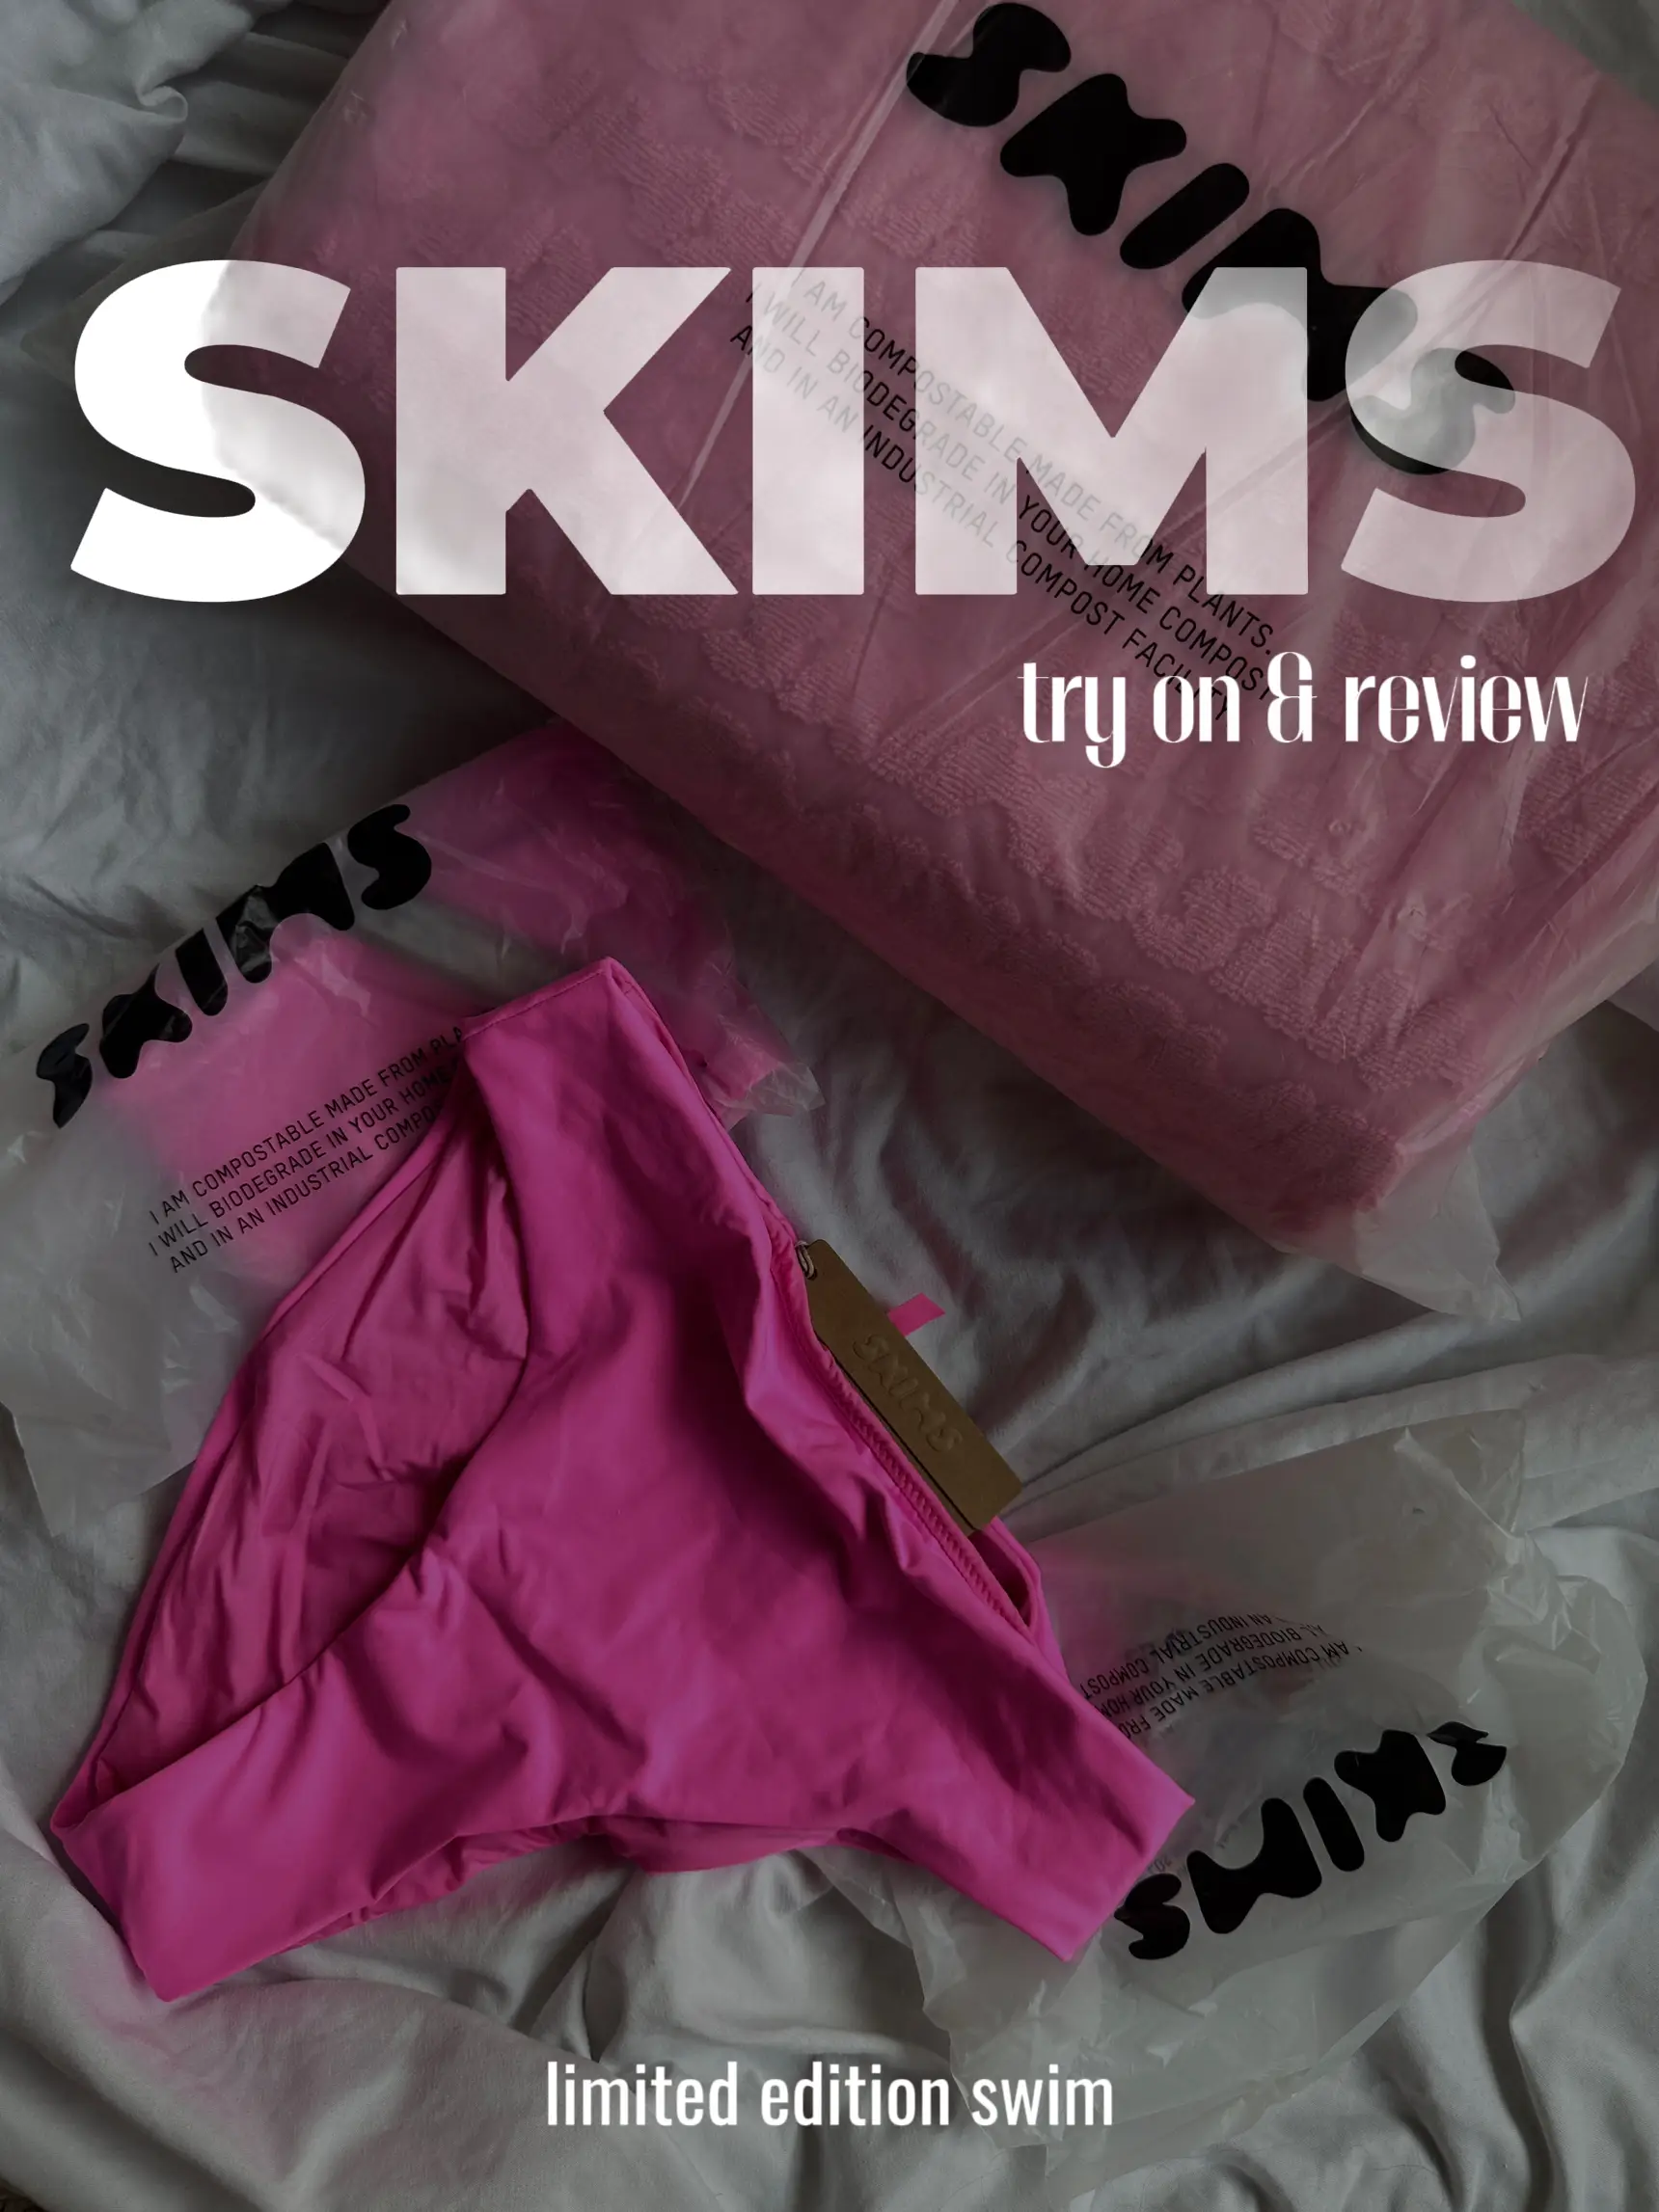 Review: We Tried Skims - Here's What To (& What NOT To) Buy